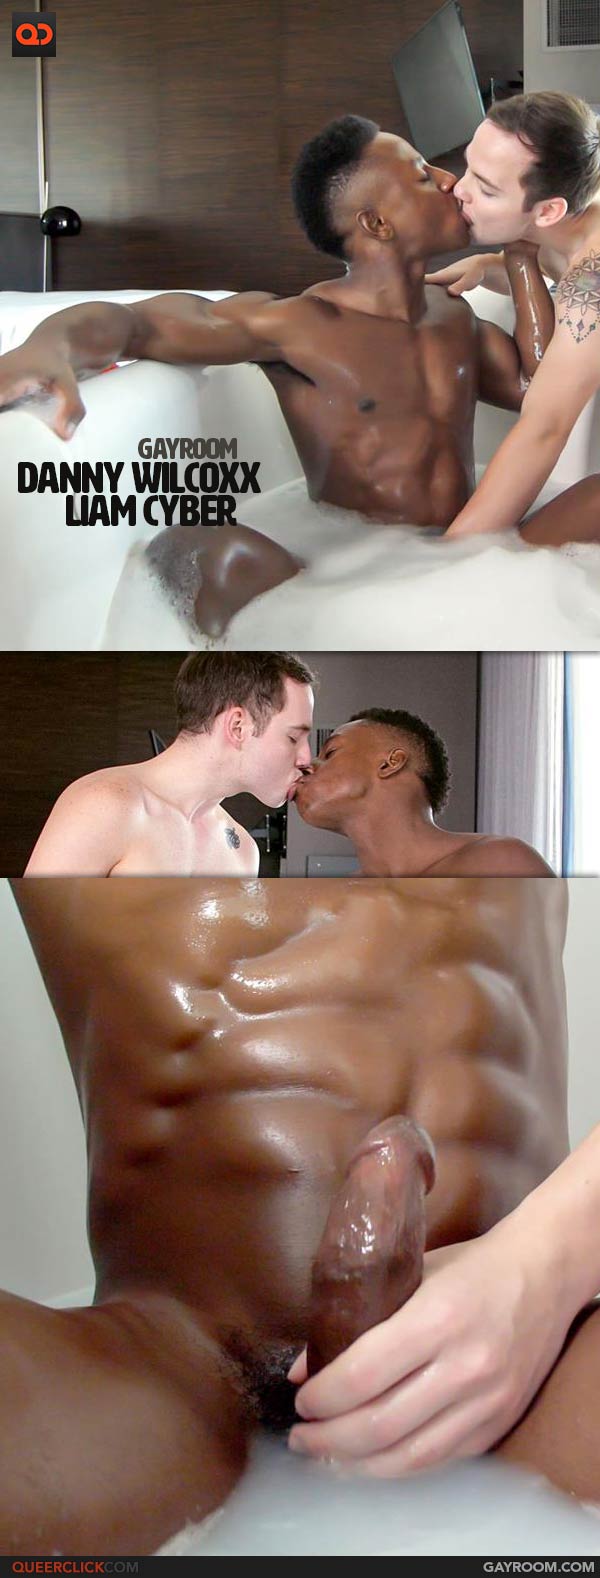 GayRoom: Danny Wilcoxx and Liam Cyber